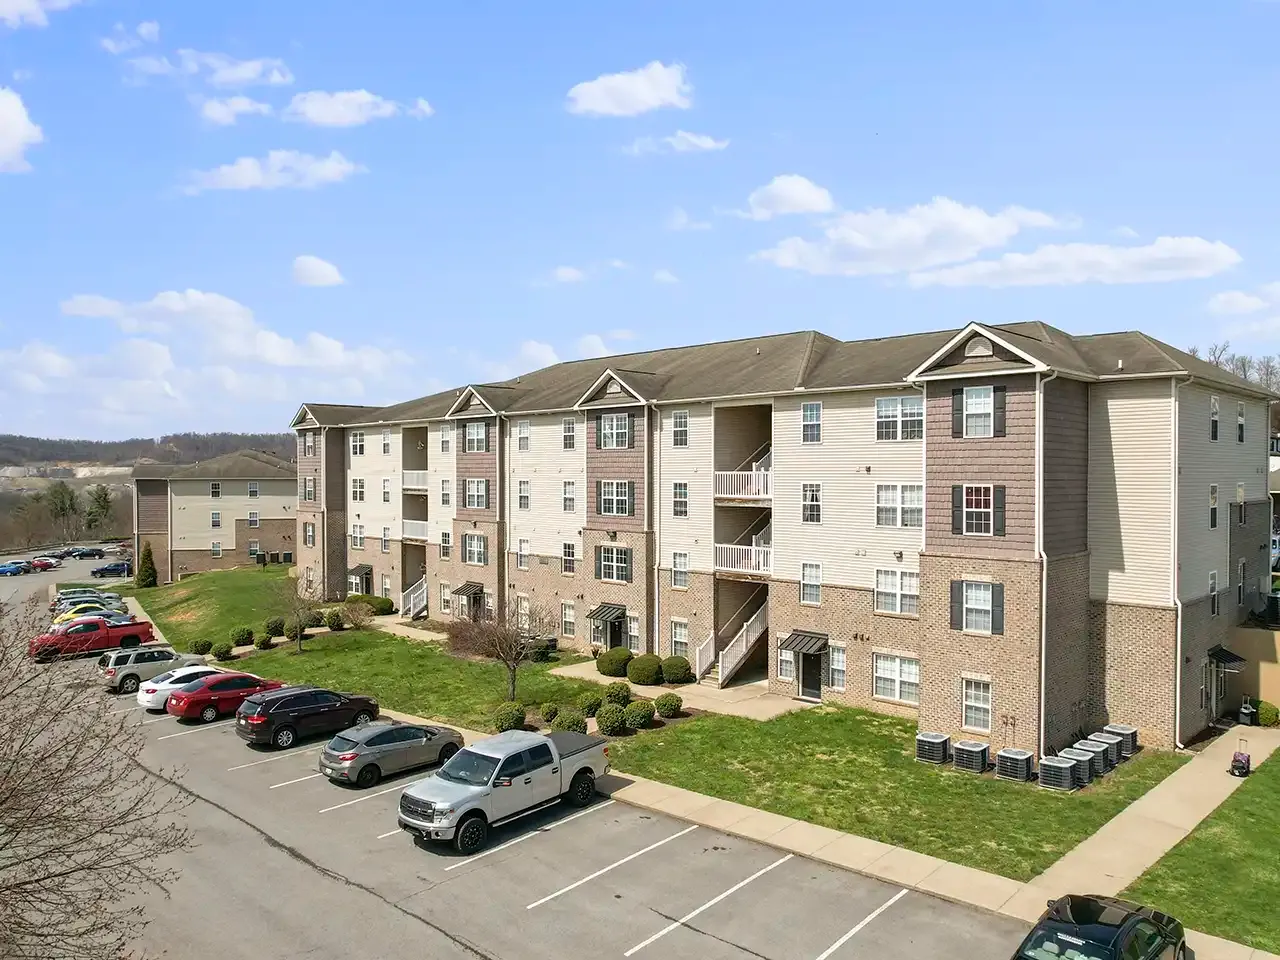 Pierpont Community & Technical College Housing Mountain Valley Apt for Pierpont Community & Technical College Students in Fairmont, WV